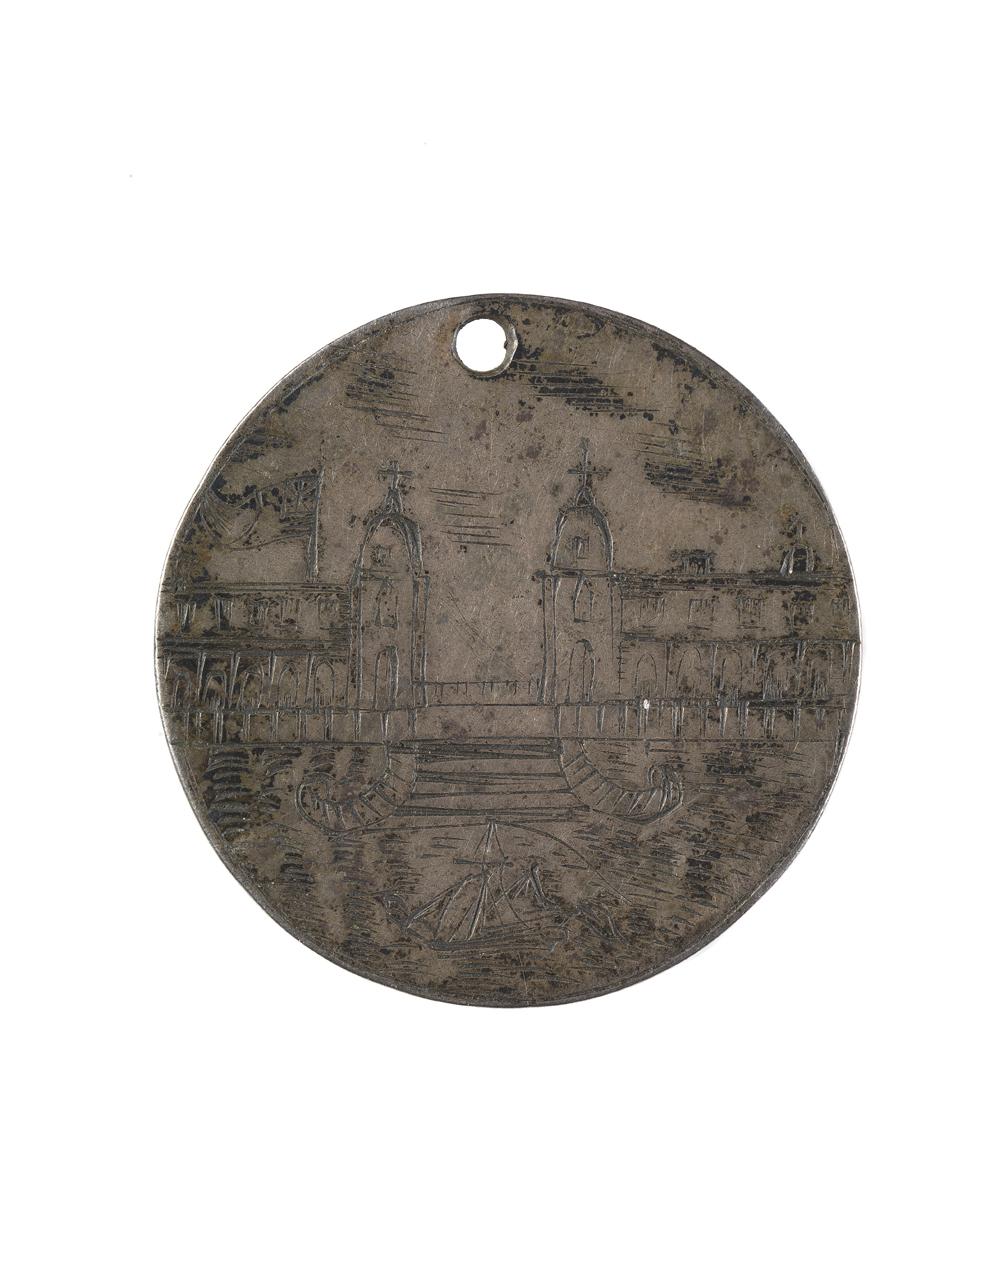 A metal token, on the obverse incised with crude view of the Old Royal Naval College (then, the Greenwich Hospital) from the Thames, the reverse reads 'Jn Resley, Greenwich School 1782'.